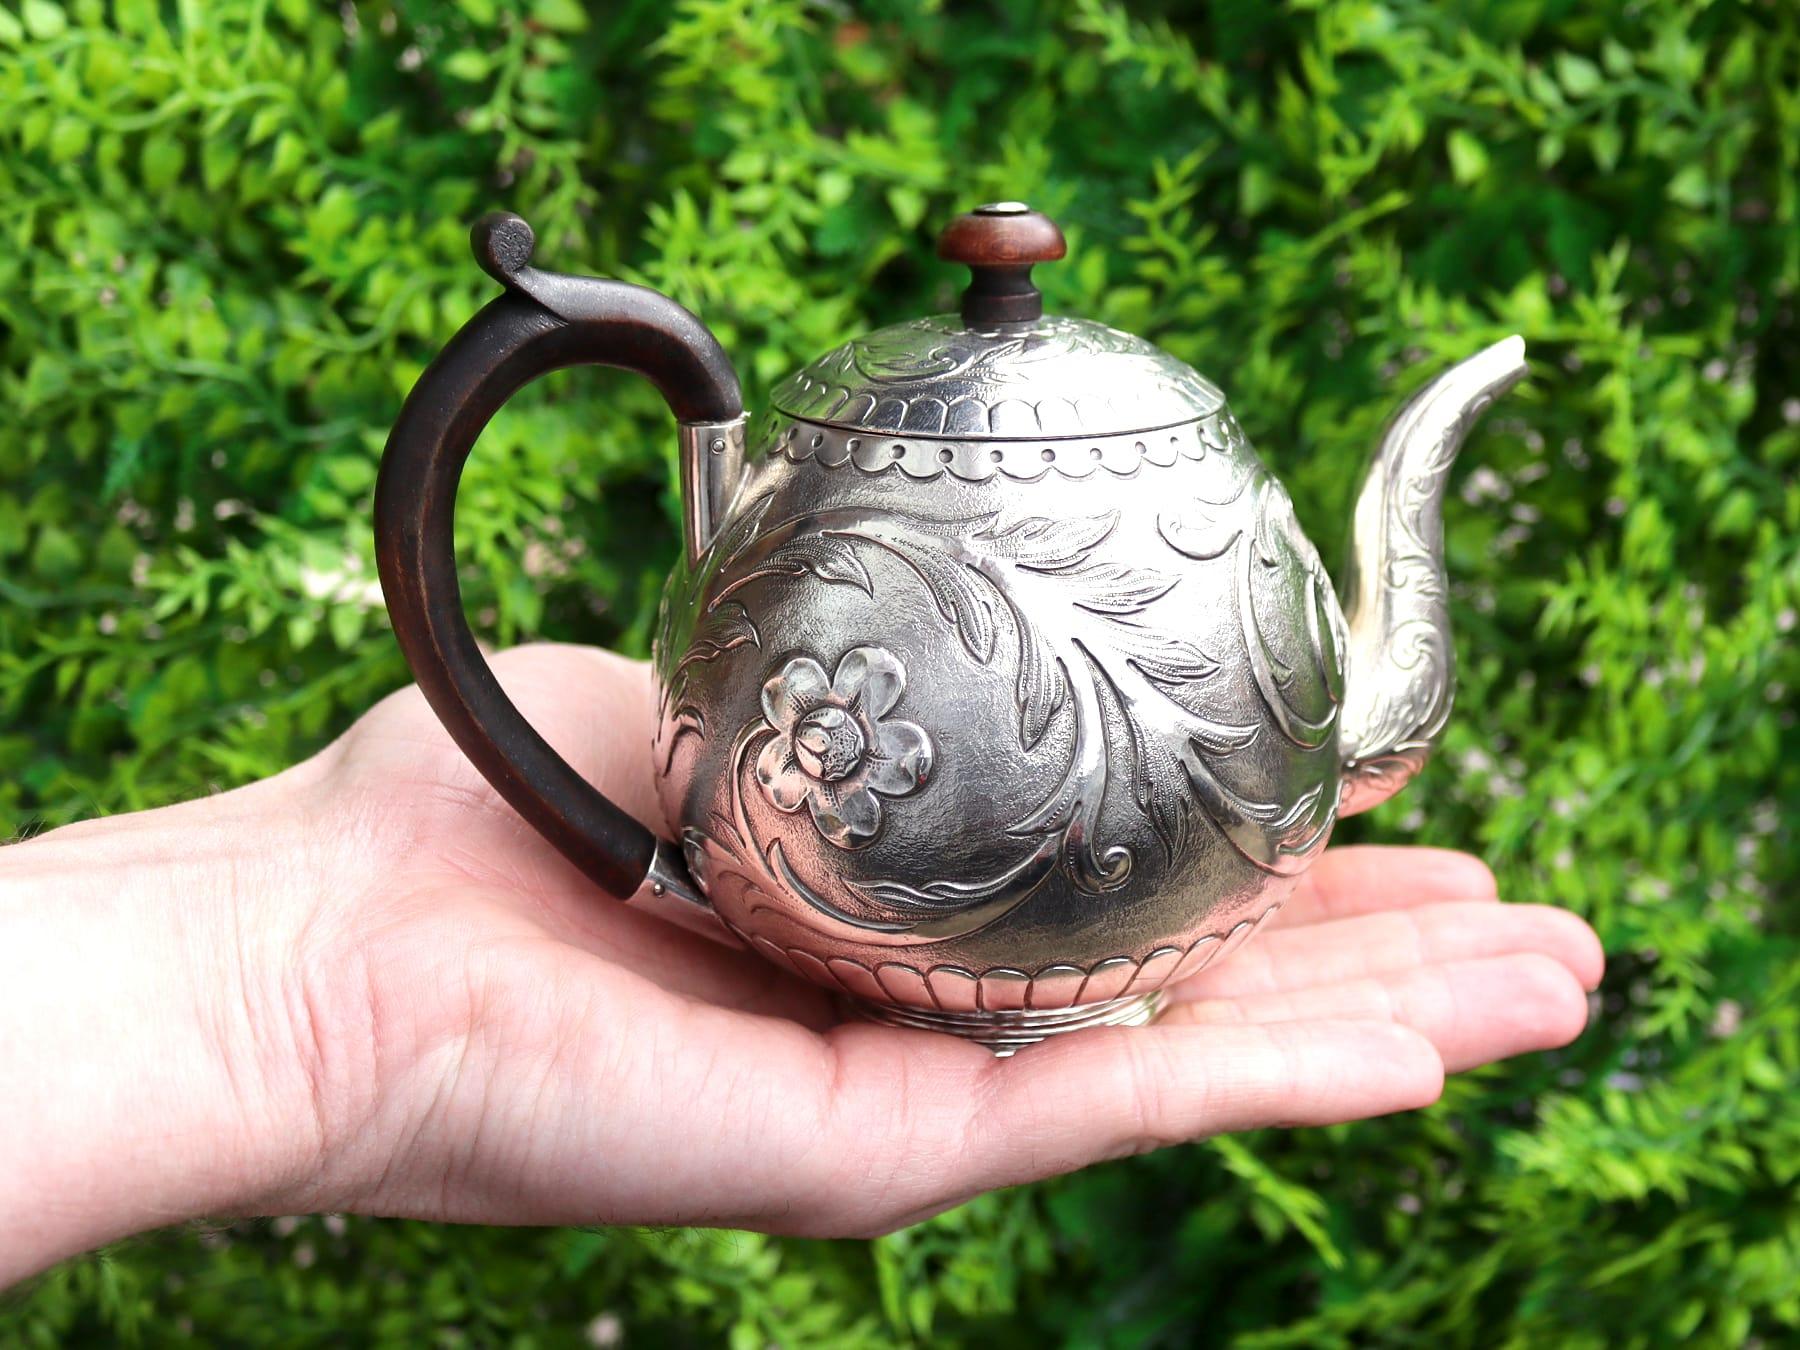 An exceptional, fine and impressive antique Dutch silver bachelor teapot; an addition to our silver teaware collection.

This exceptional, fine and impressive antique Dutch sterling silver bachelor teapot has a circular rounded form onto a